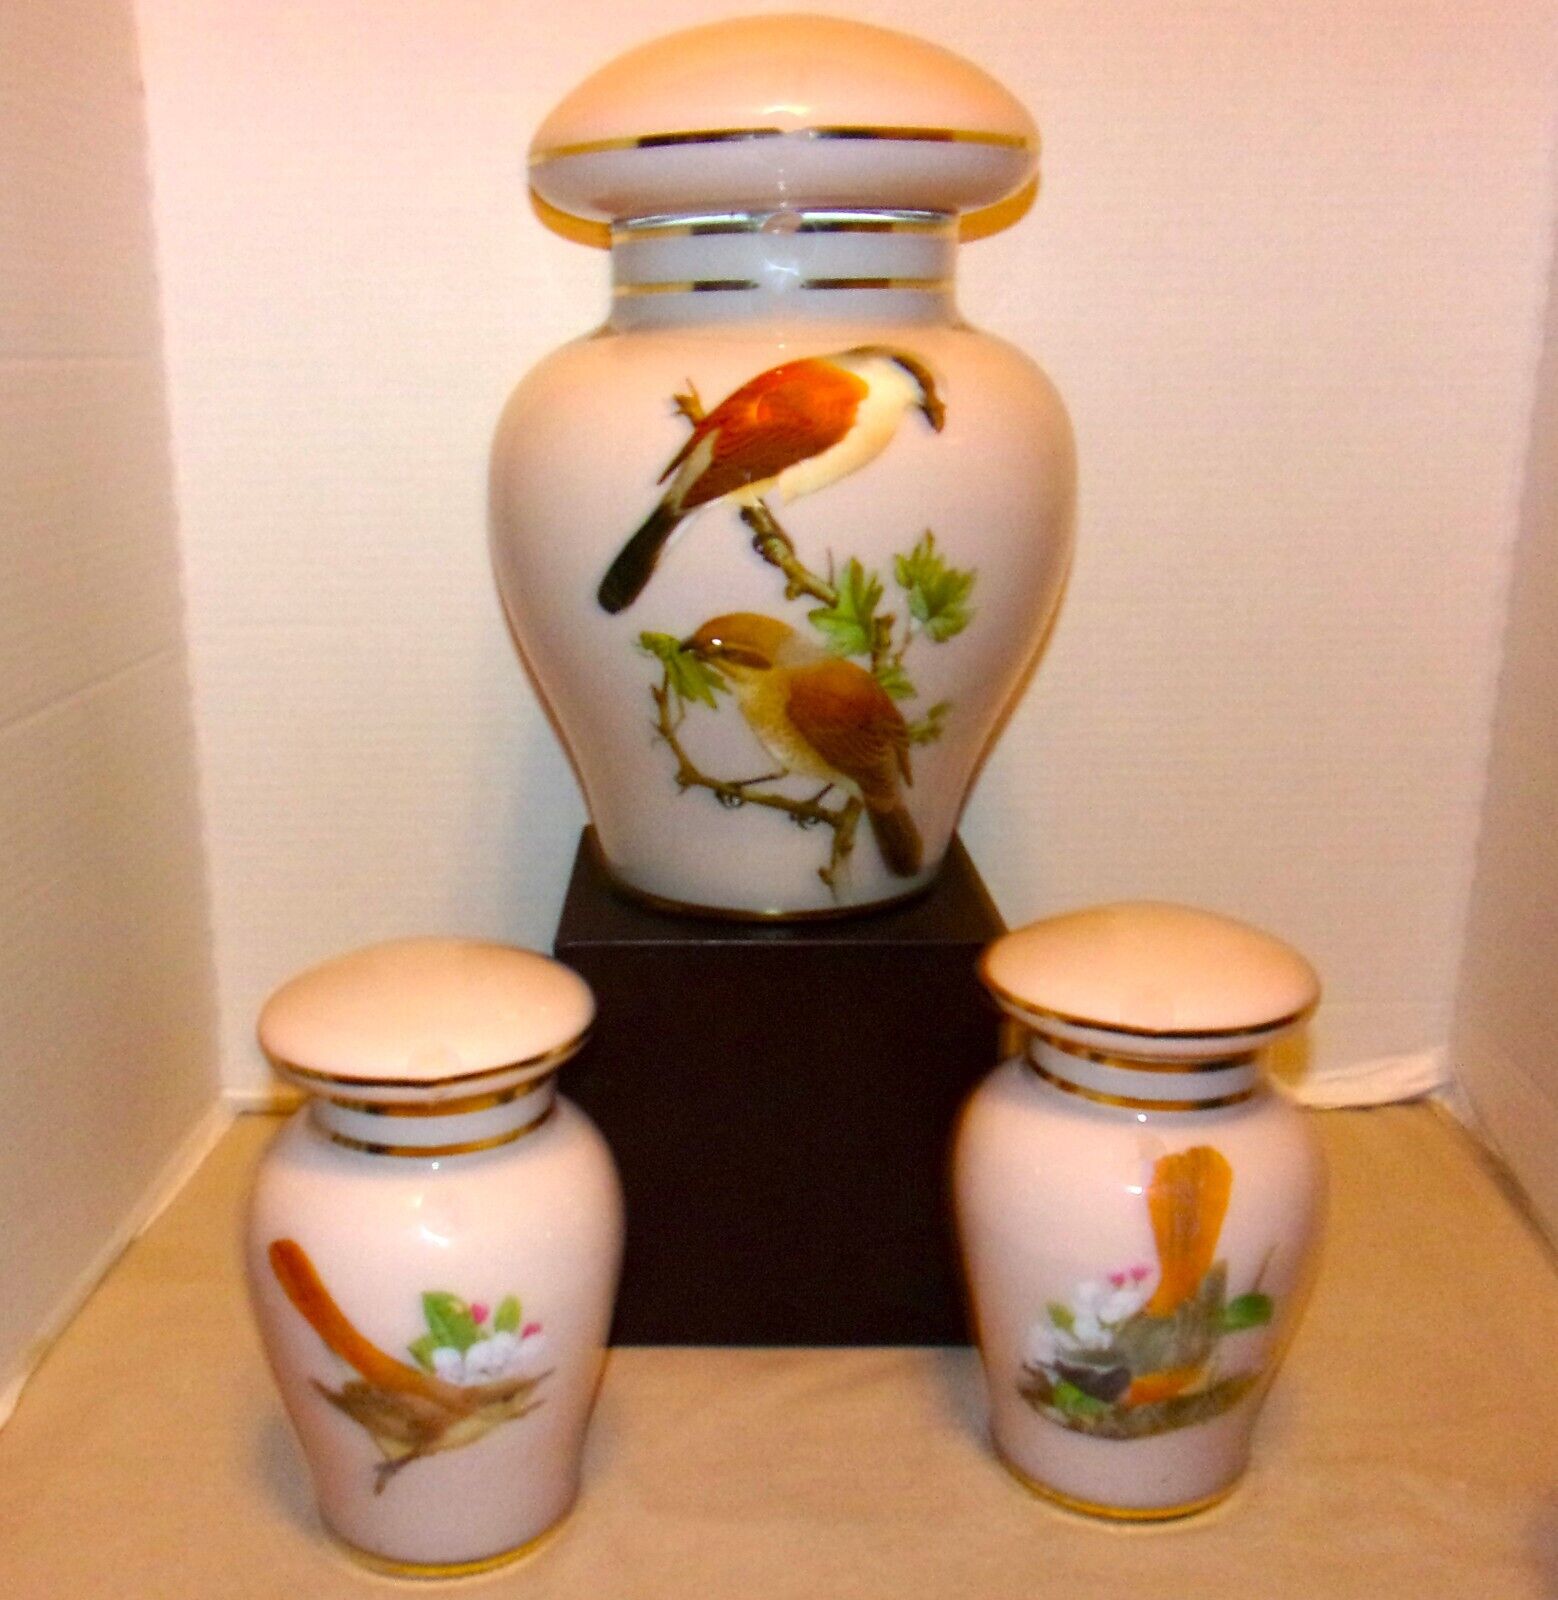 3 Pc. Set of Reverse Painting on Glass Ginger Jars w/Wild Birds Painted on Them